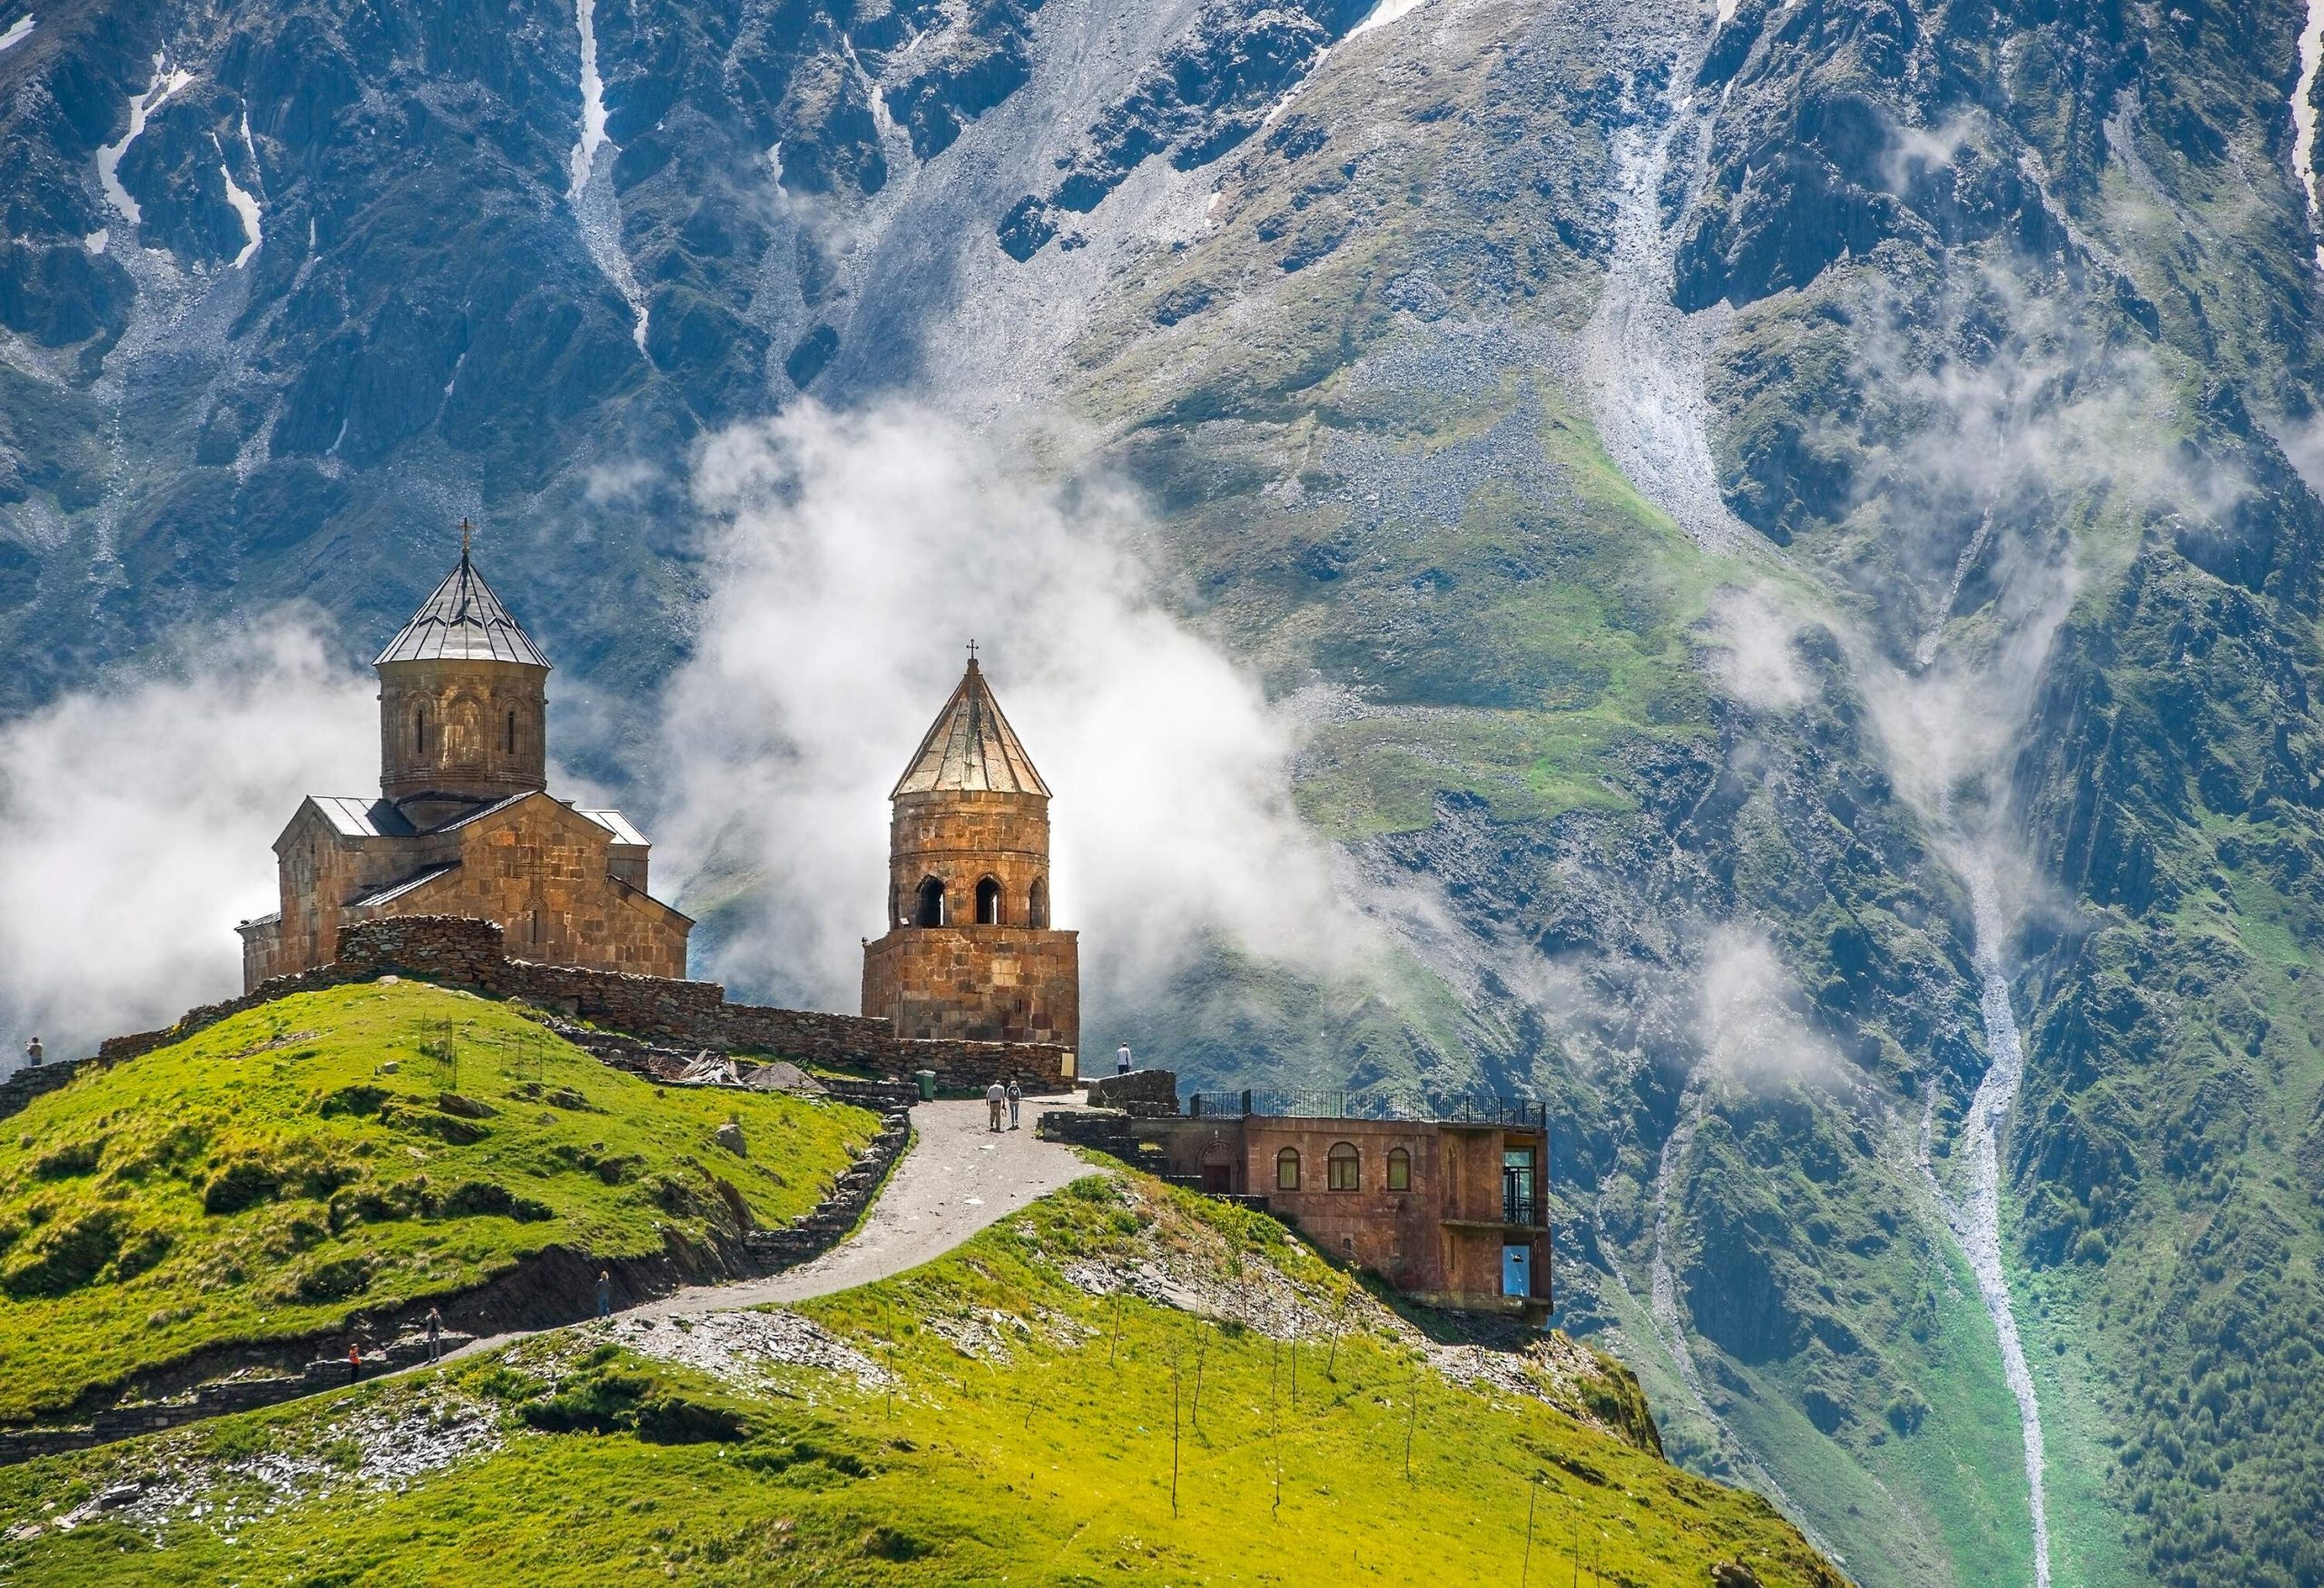 The Gergeti Trinity Church, dating back to the 14th century, showcases a distinct conical roof and stands alongside a separate bell tower atop a high mountain, offering breathtaking views of the surrounding mountainous landscape.